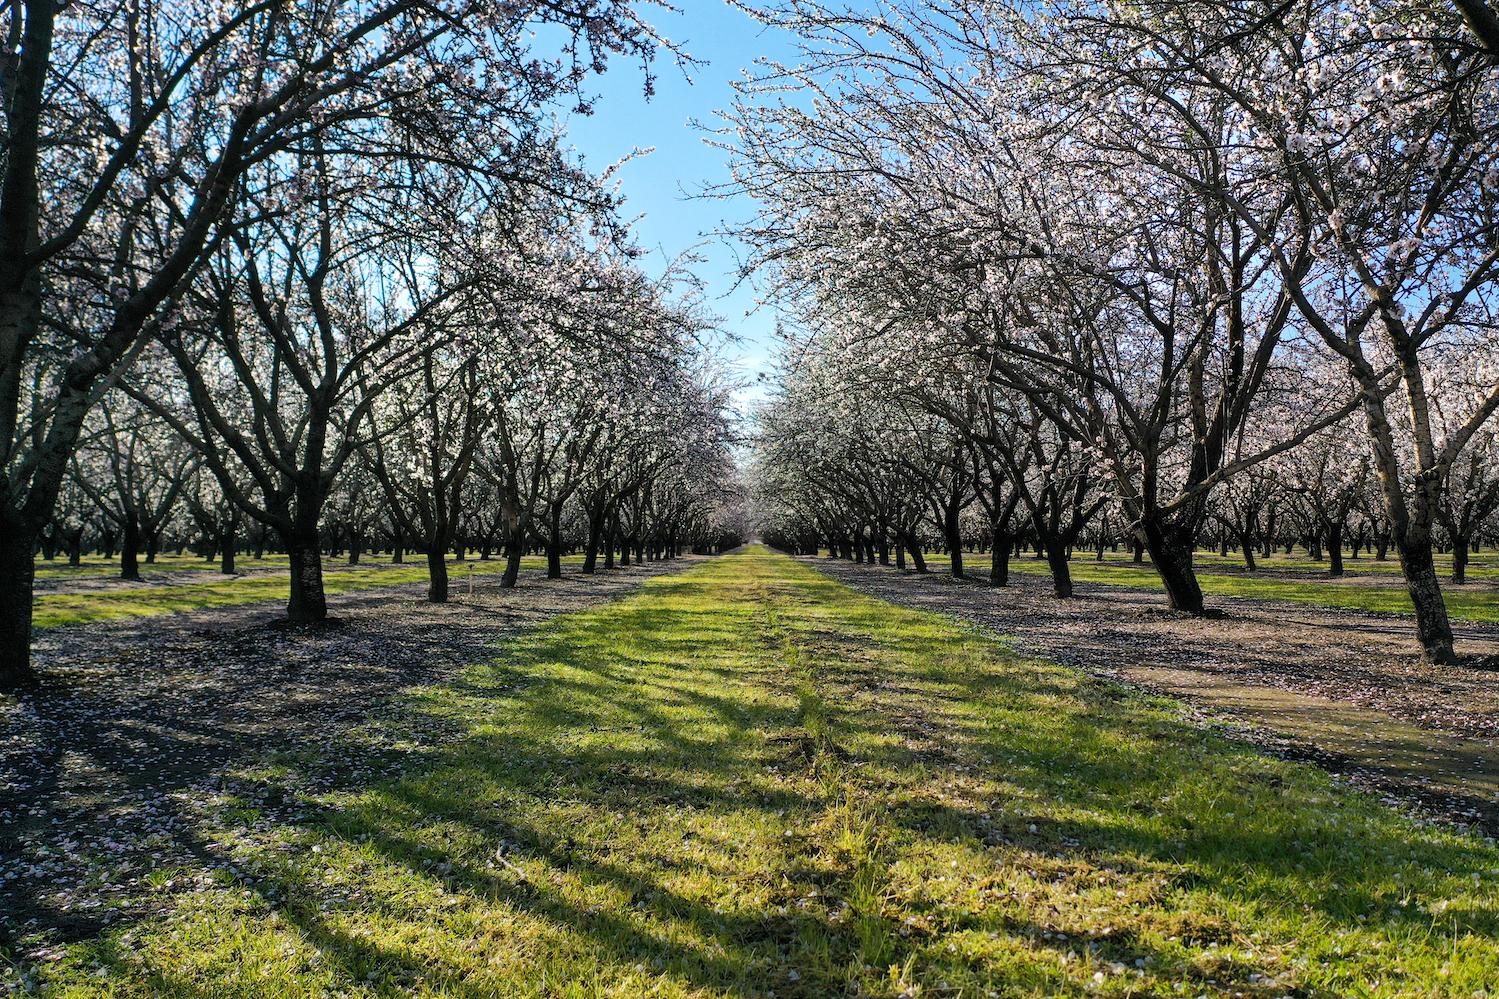 Rows of almond trees growing on the Kind Almonds Acres Initiative's 500-acre space in Fresno, California.